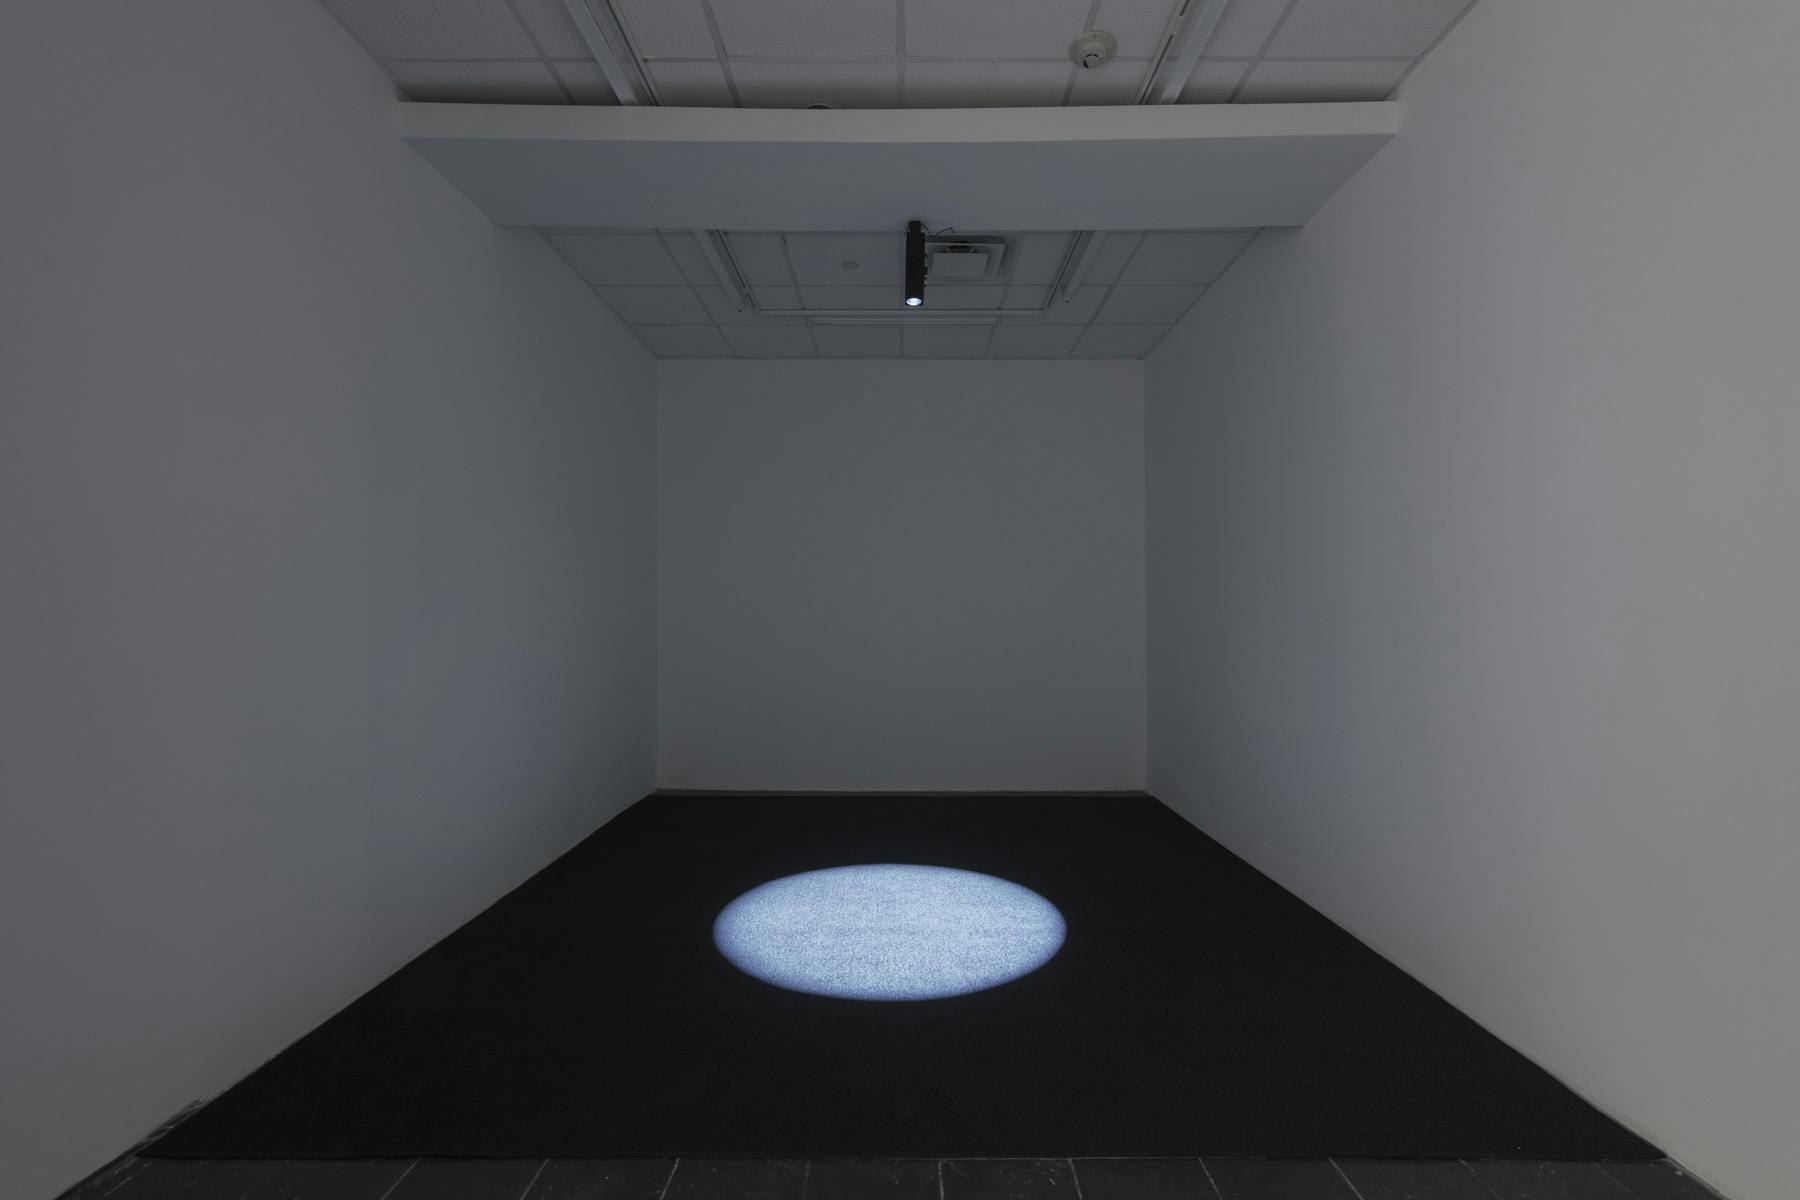 Installation view of a white-walled room with a ceiling-mounted light creating a bright circular shape on the floor.